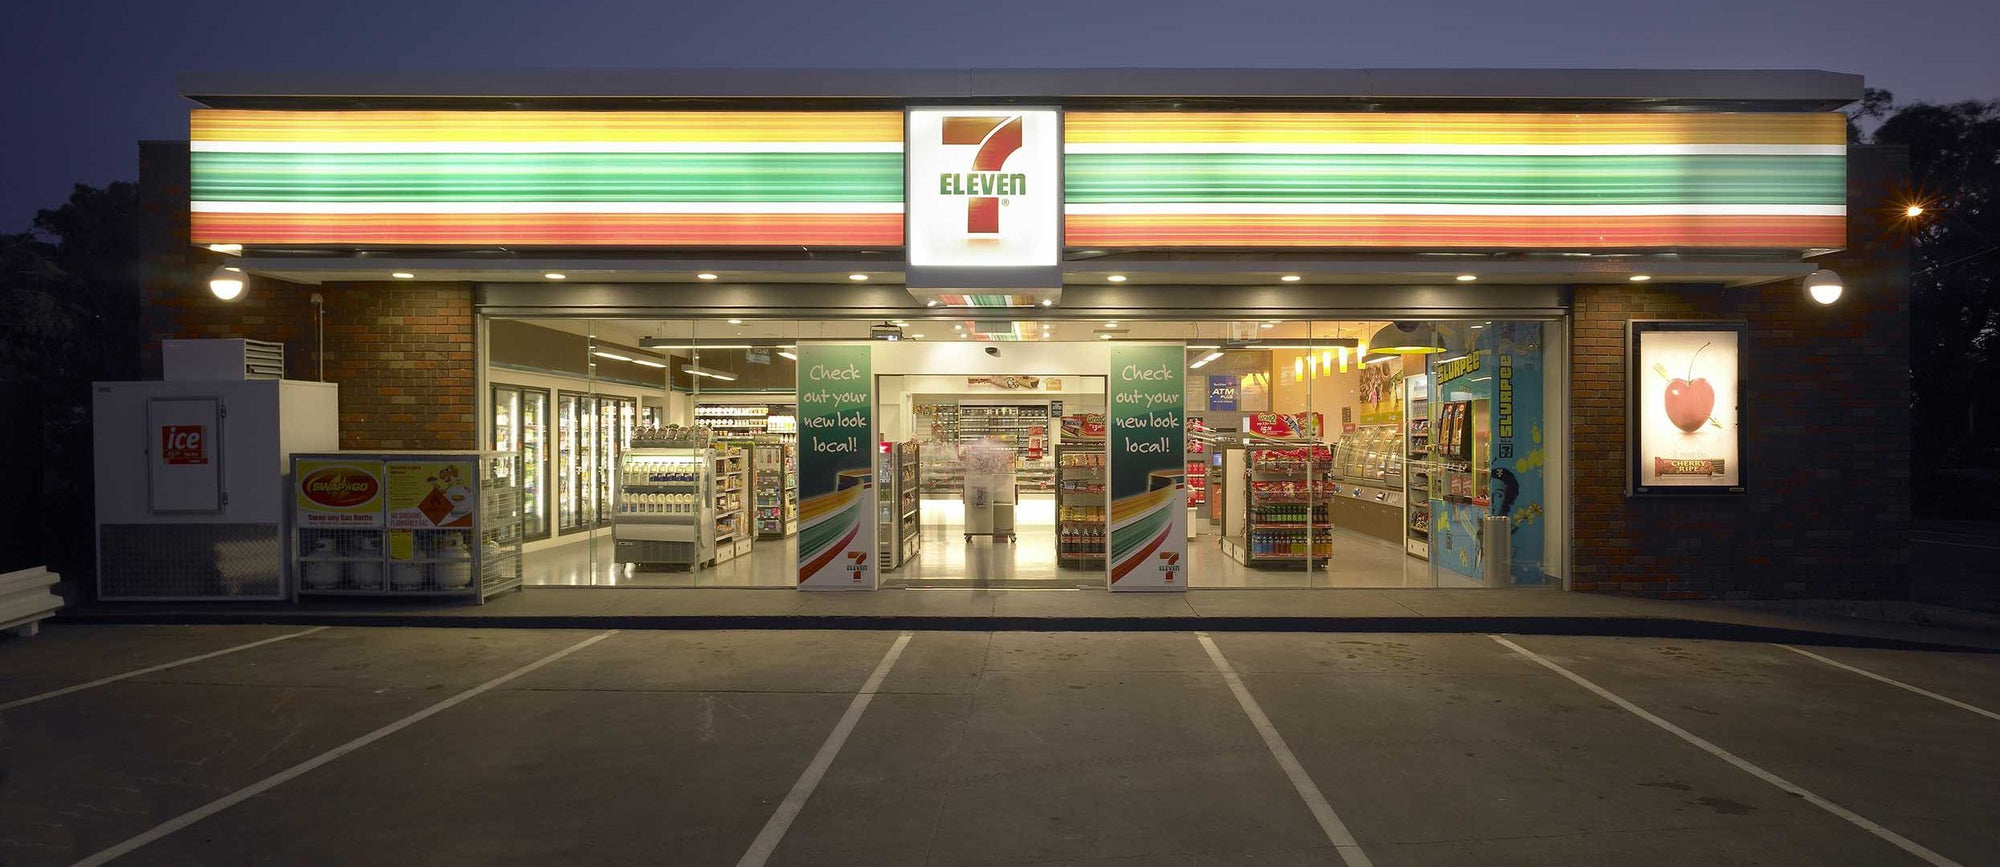 WELCOME, 7/11